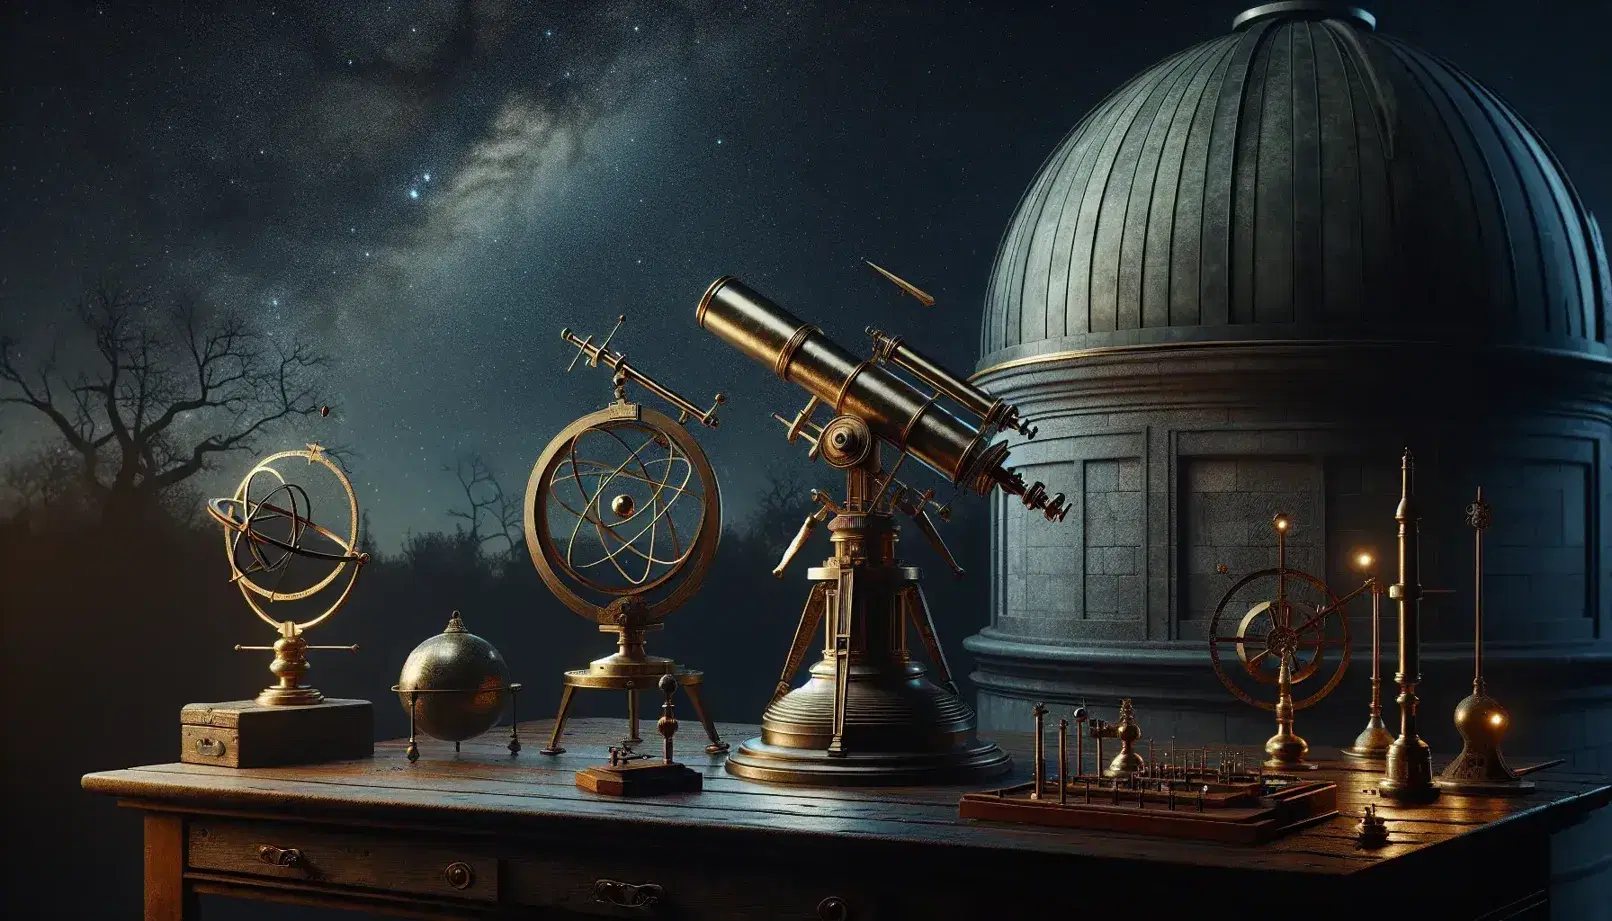 Classic observatory with open dome overlooking the starry sky, brass telescope on tripod and ancient scientific instruments illuminated by an oil lamp.